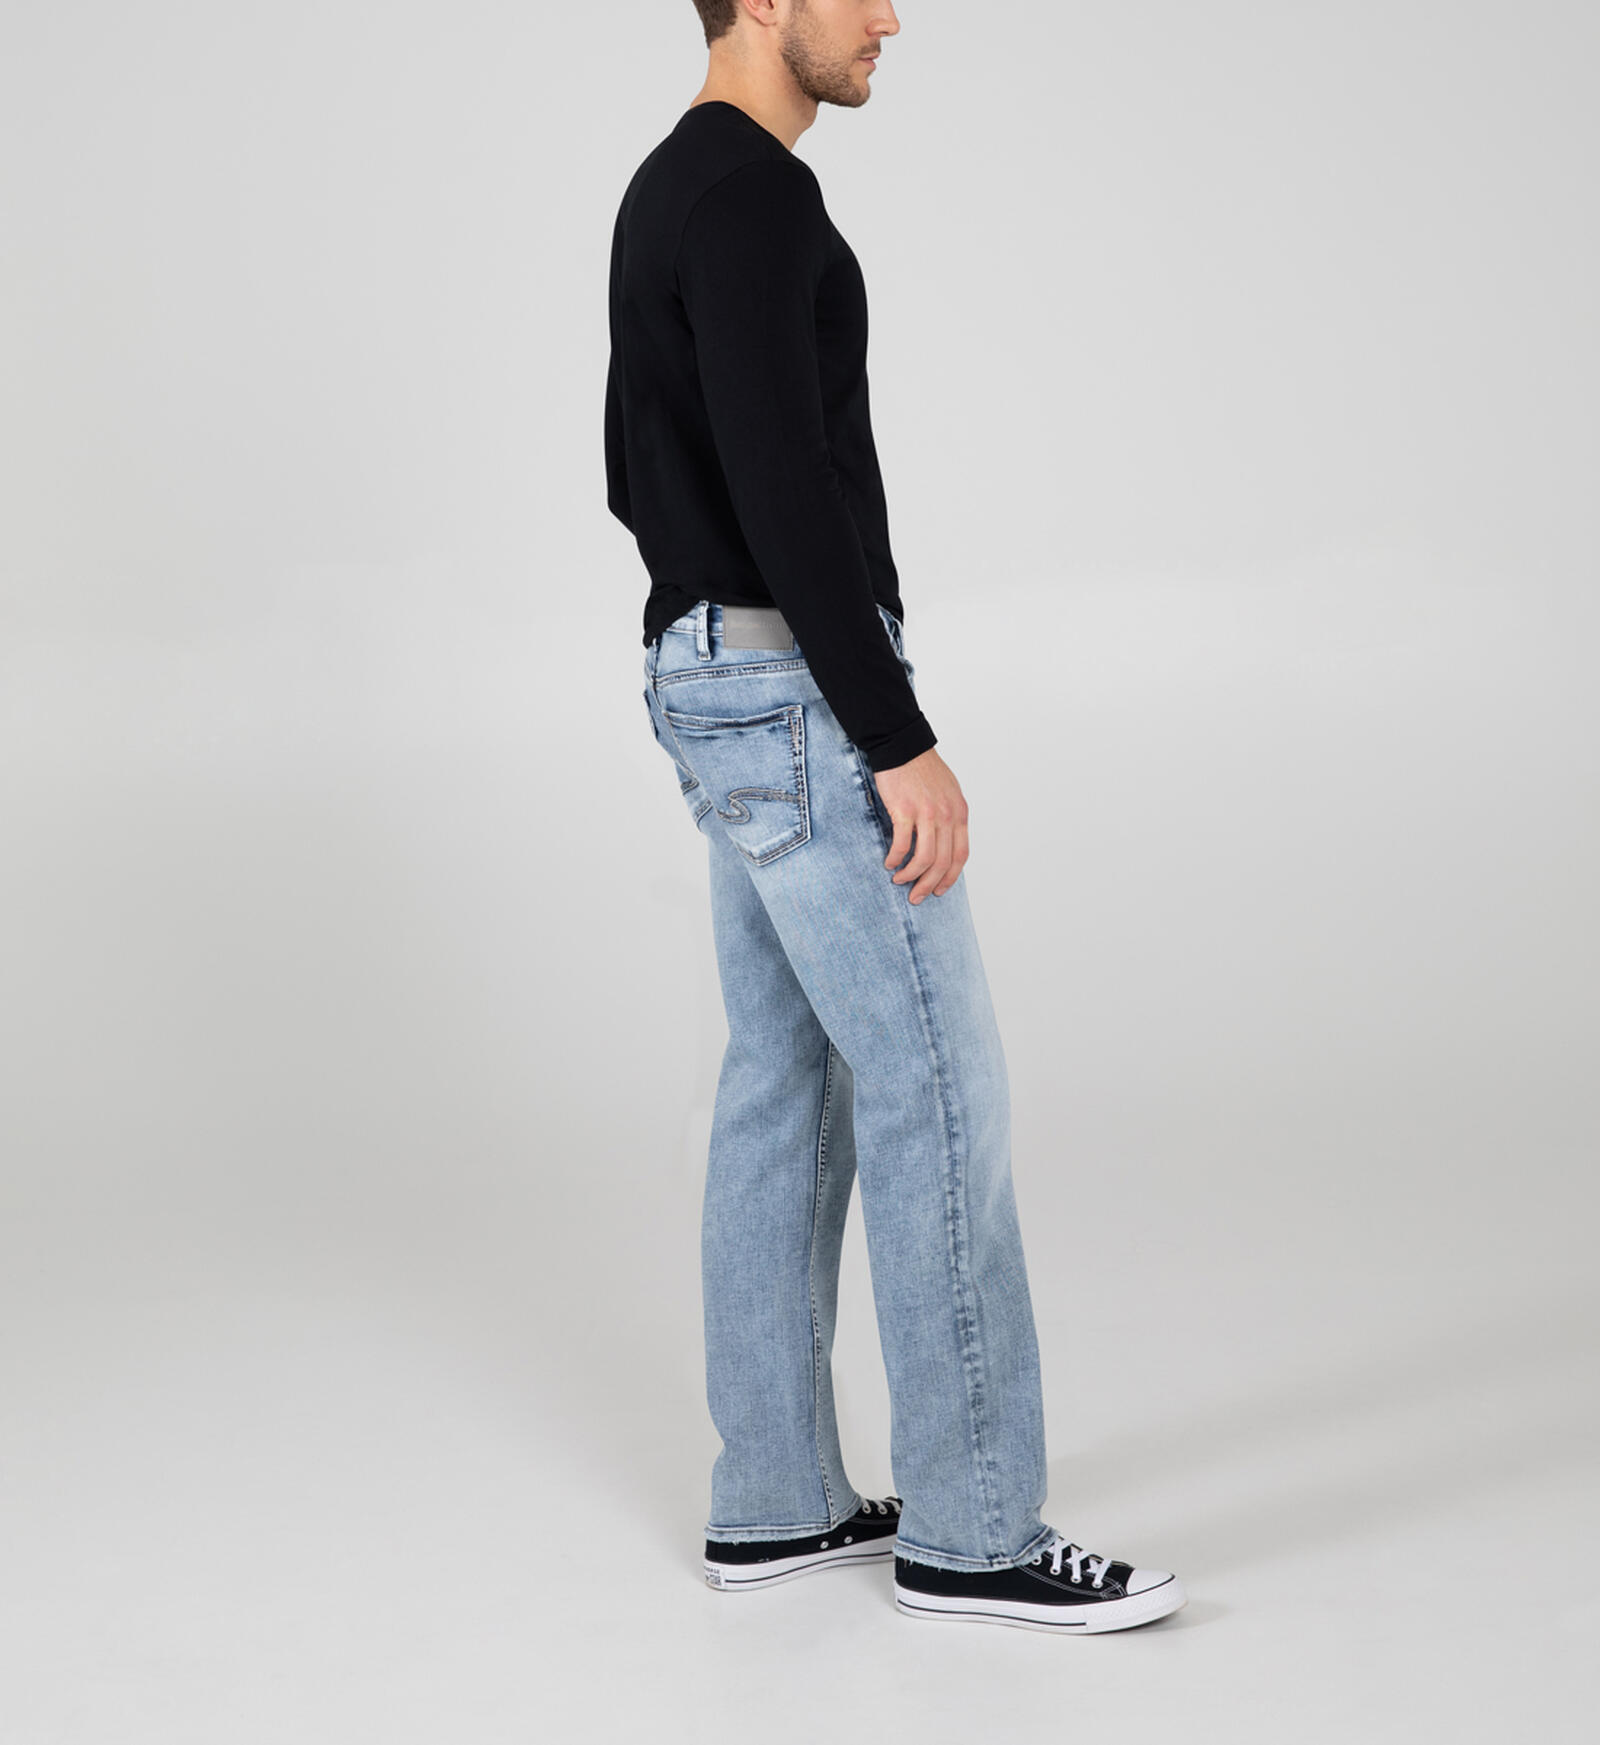 Buy Grayson Easy Fit Straight Leg Jeans for CAD 114.00